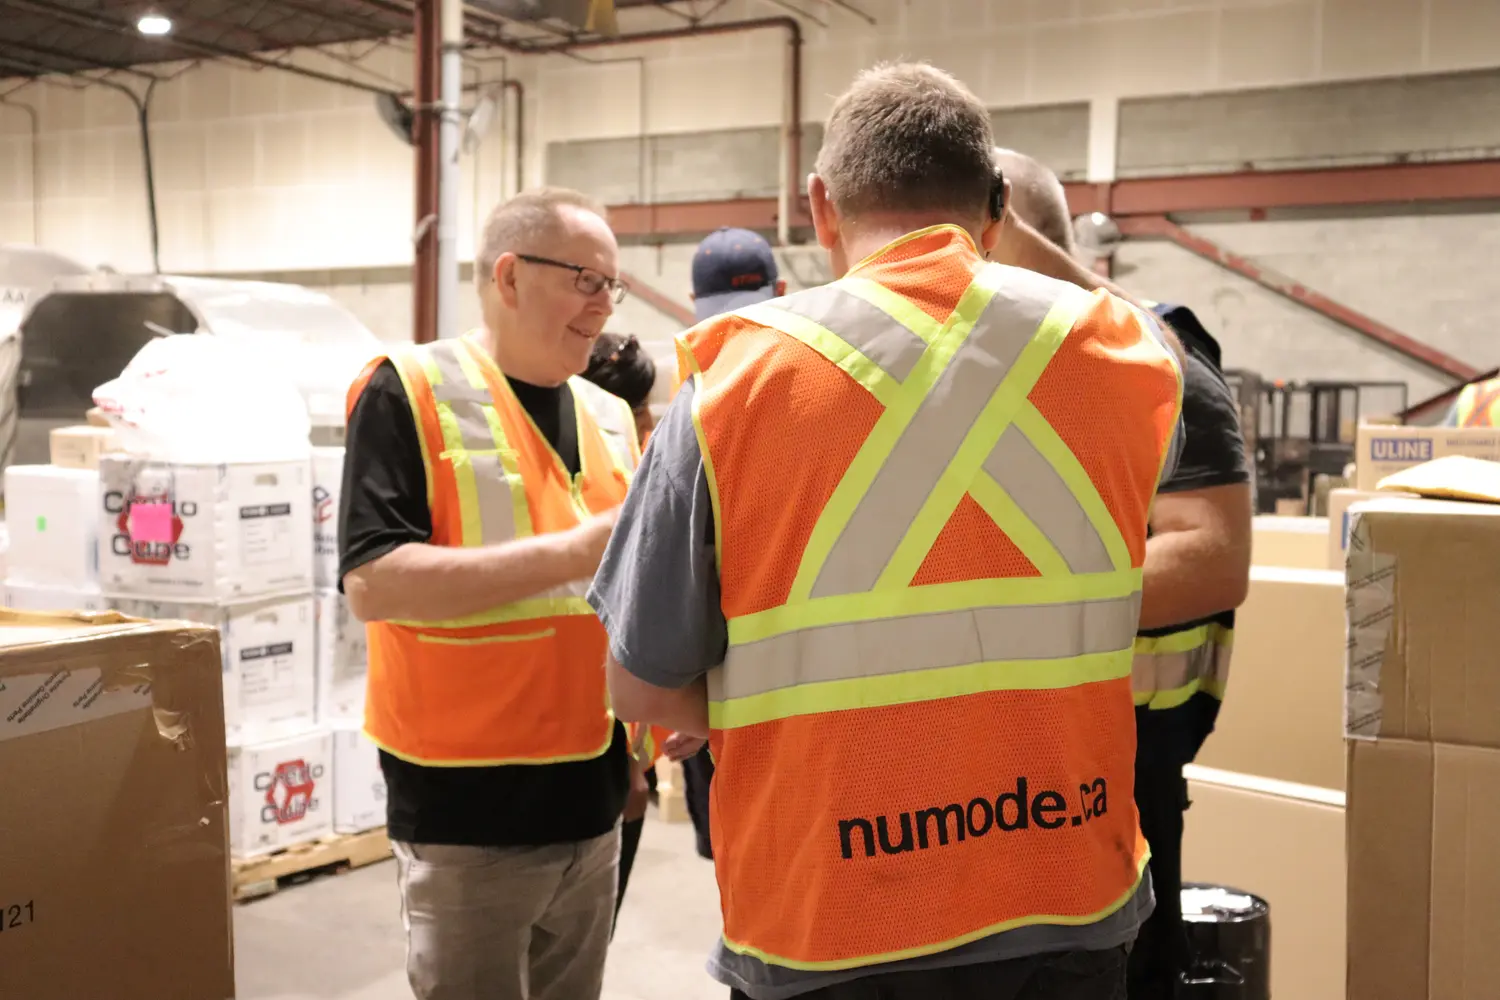 Numode employees planning the route for dedicated services in our warehouse